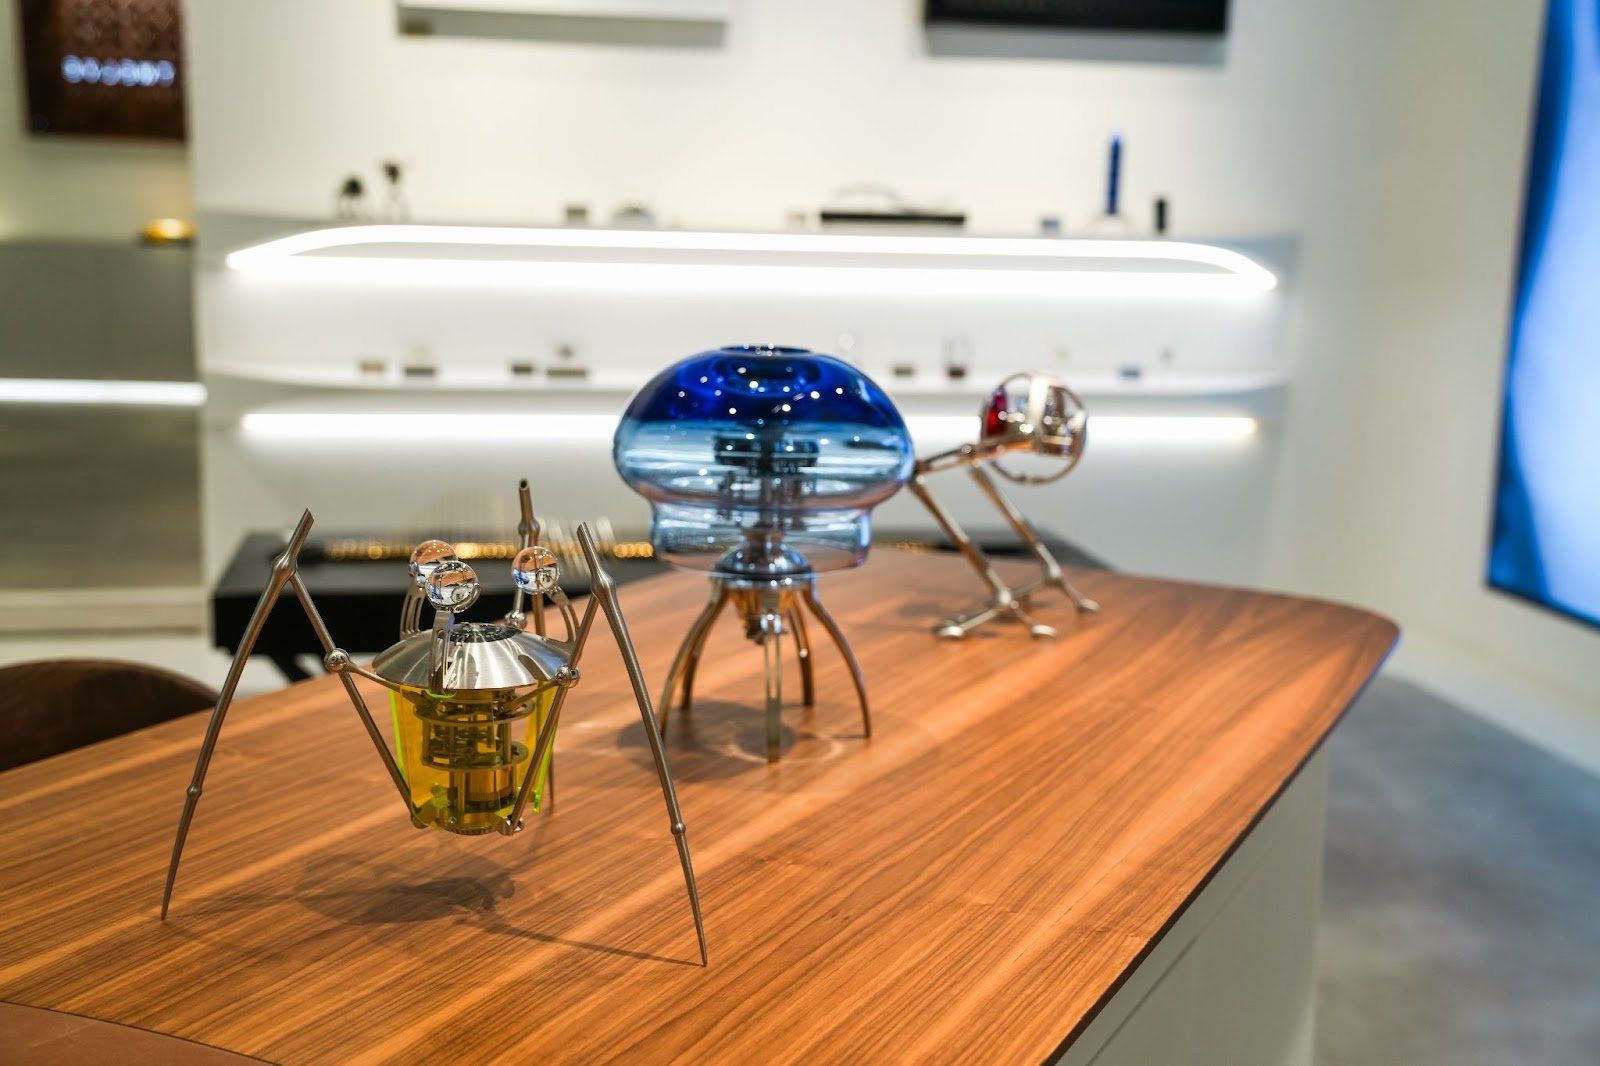 The MB&F Co-Creations